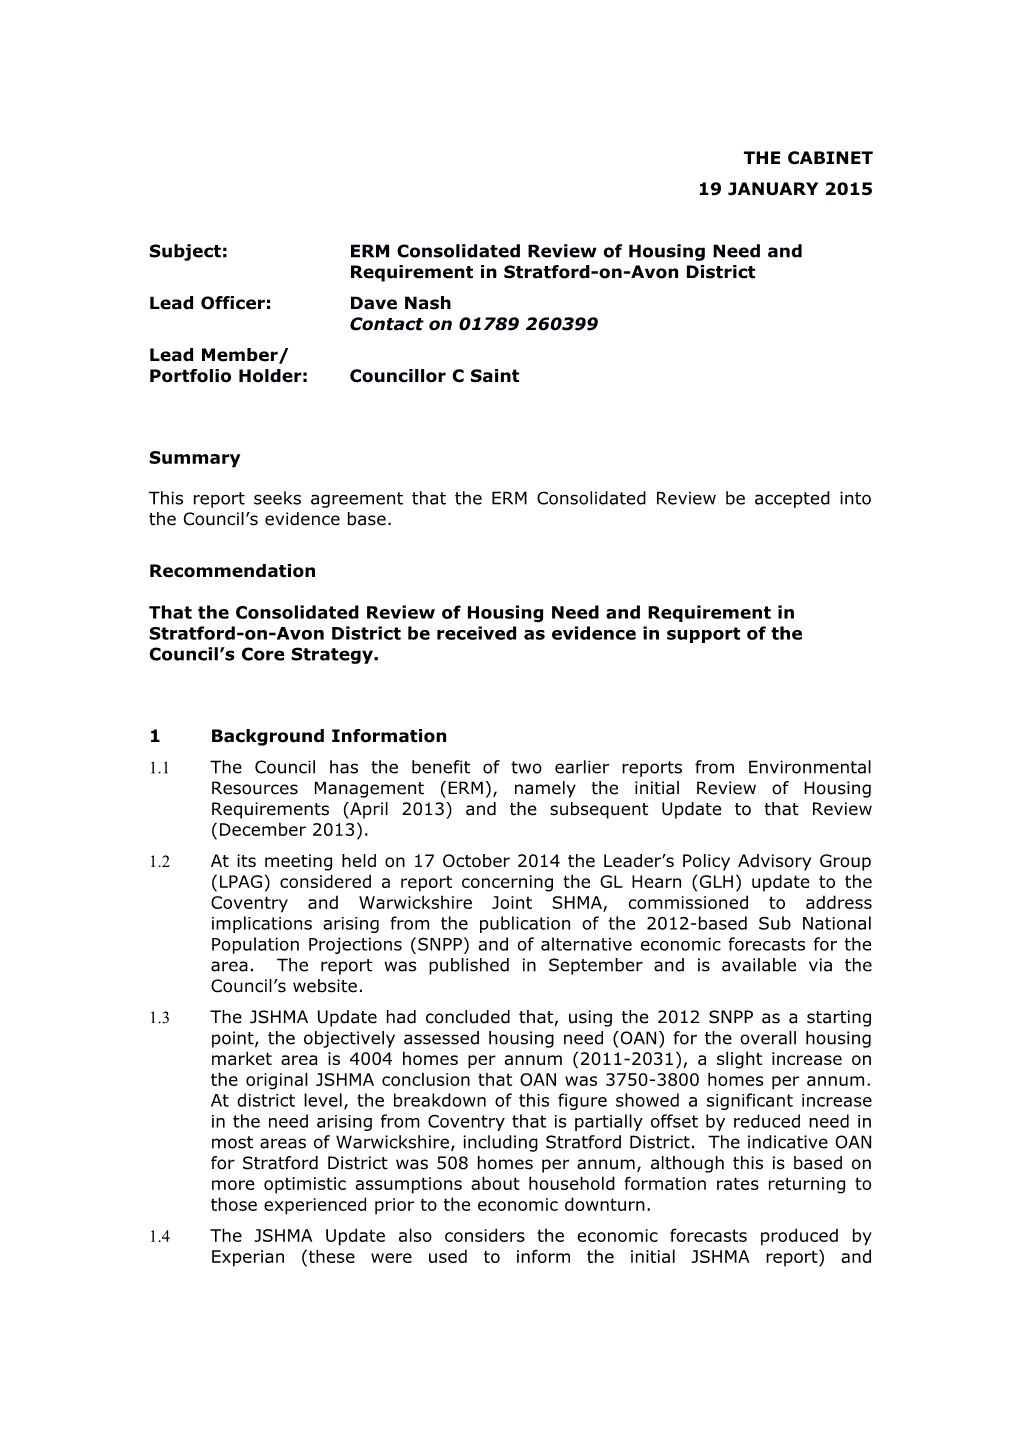 Subject:ERM Consolidated Review of Housing Need and Requirement in Stratford-On-Avon District